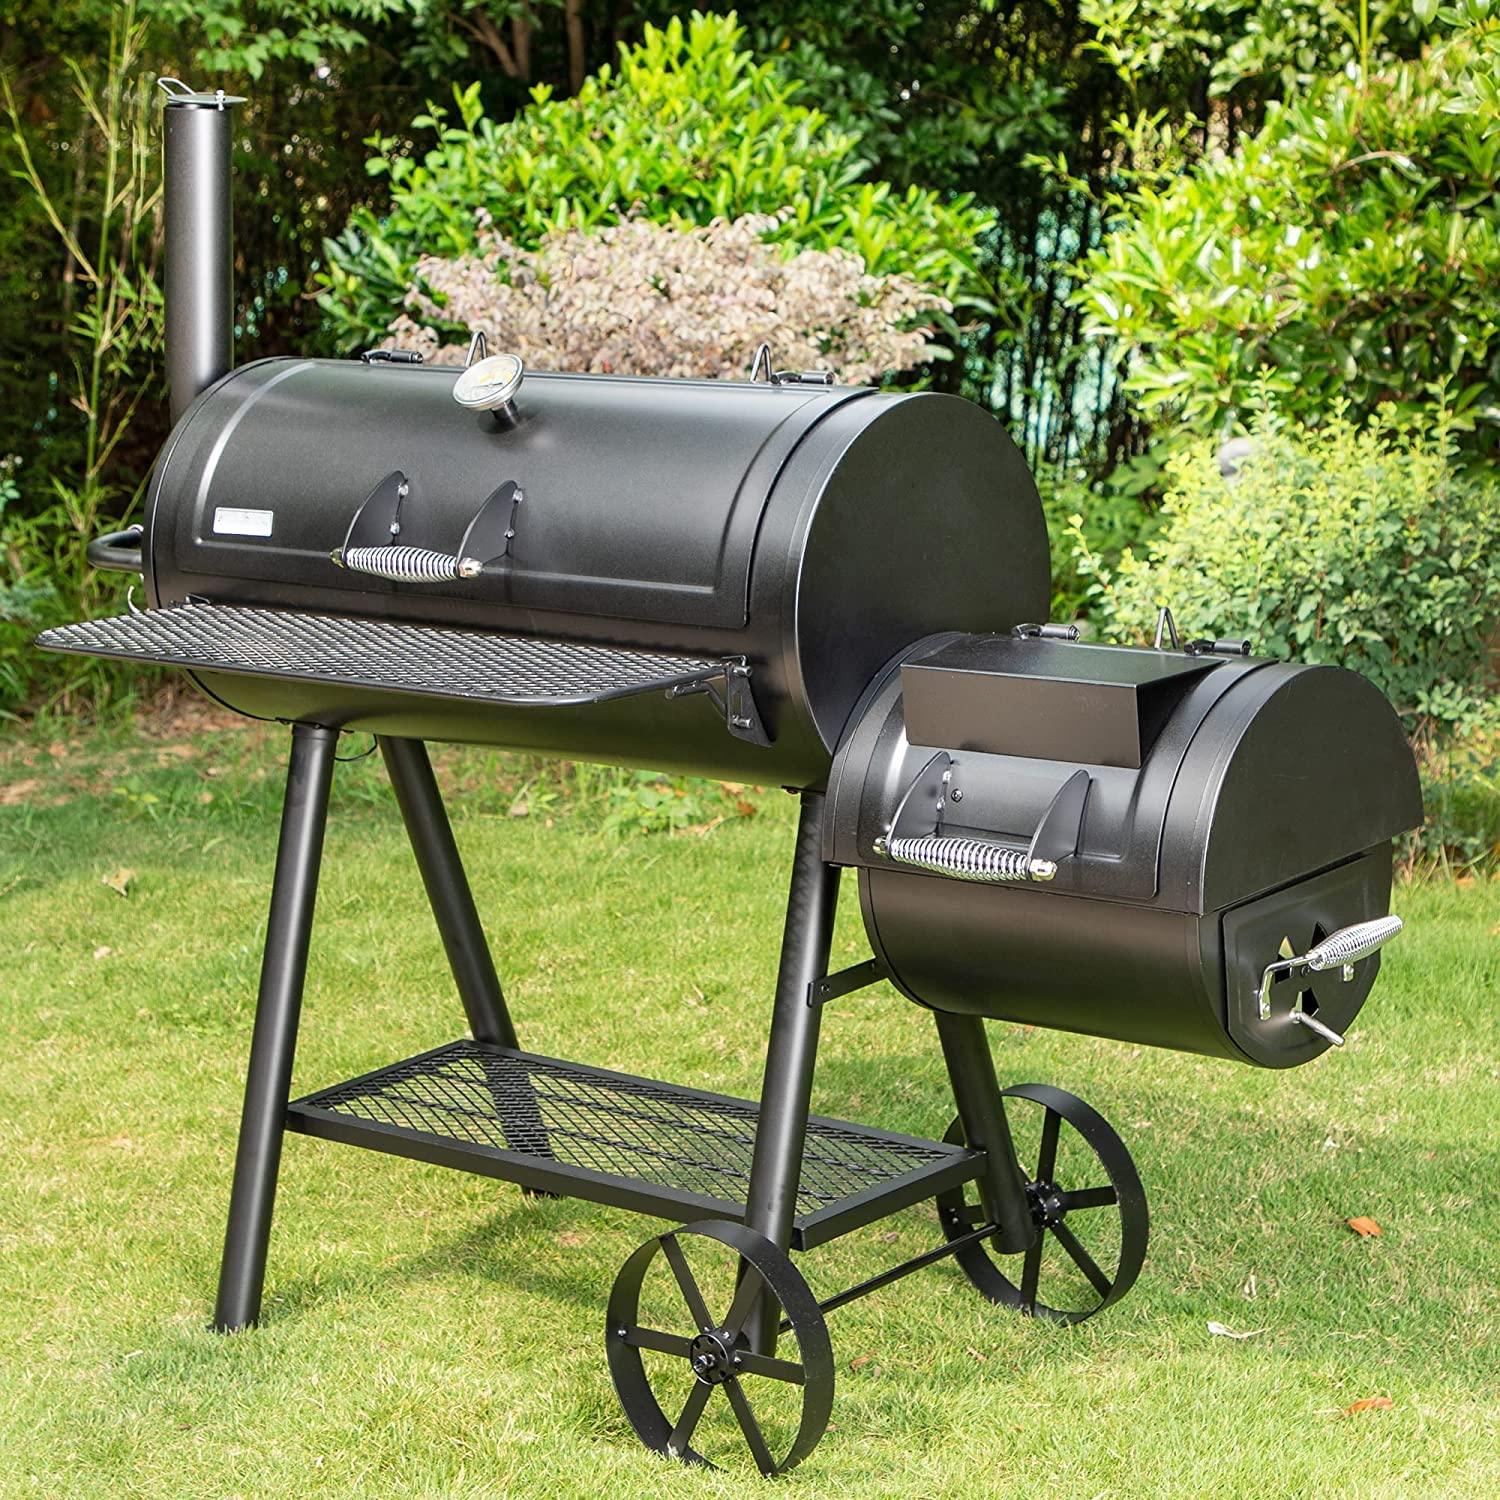 MFSTUDIO Heavy Duty Smoker, X-Large Charcoal Grill with Offset Smoker, 942 sq.in. Cooking Area, For Outdoor Camping Family & Friends Gathering, Black - CookCave